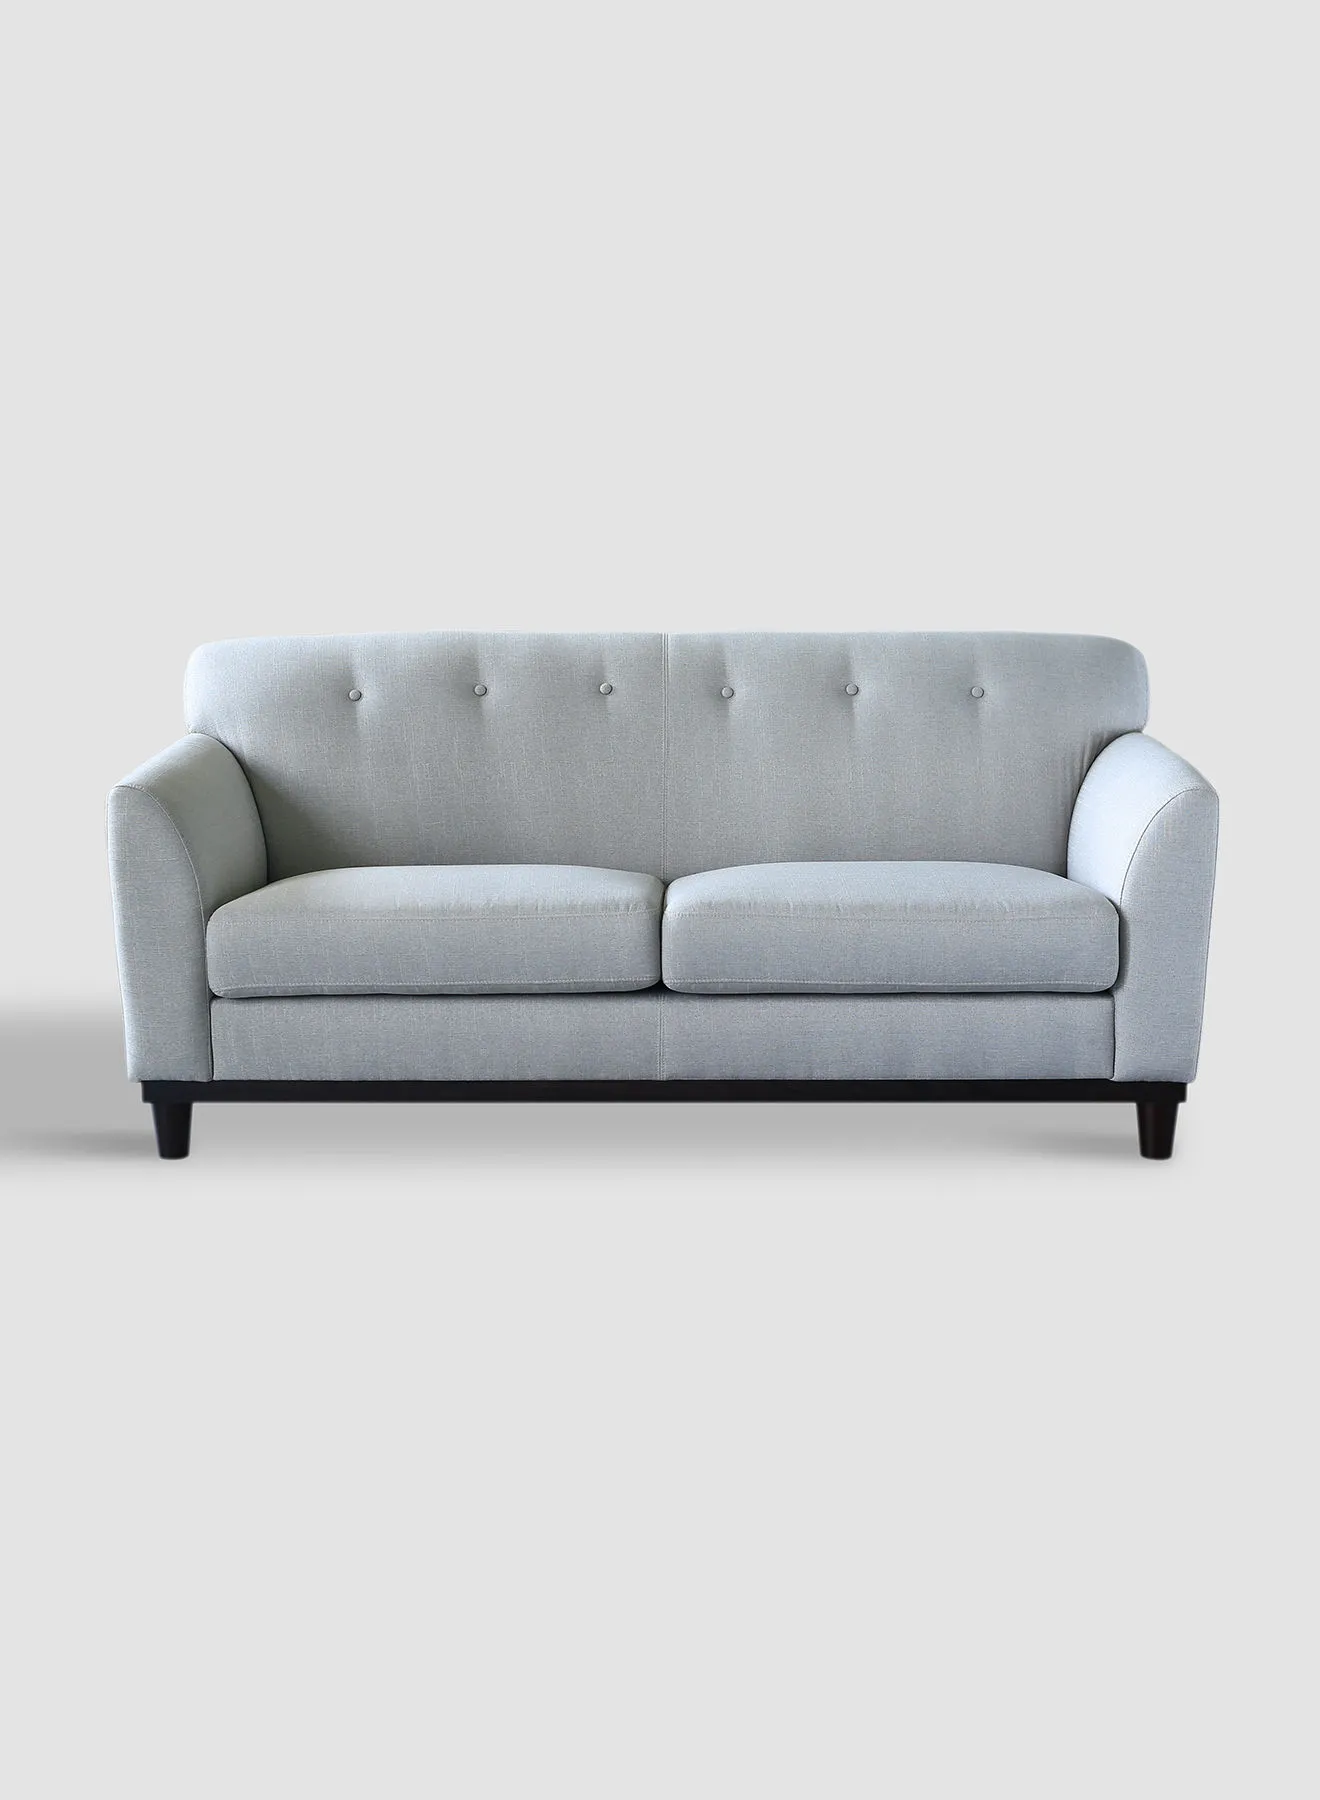 Switch Sofa - Lightish Grey Couch - 1880 X 940 X 790 - 3 Seater Sofa Relaxing Sofa